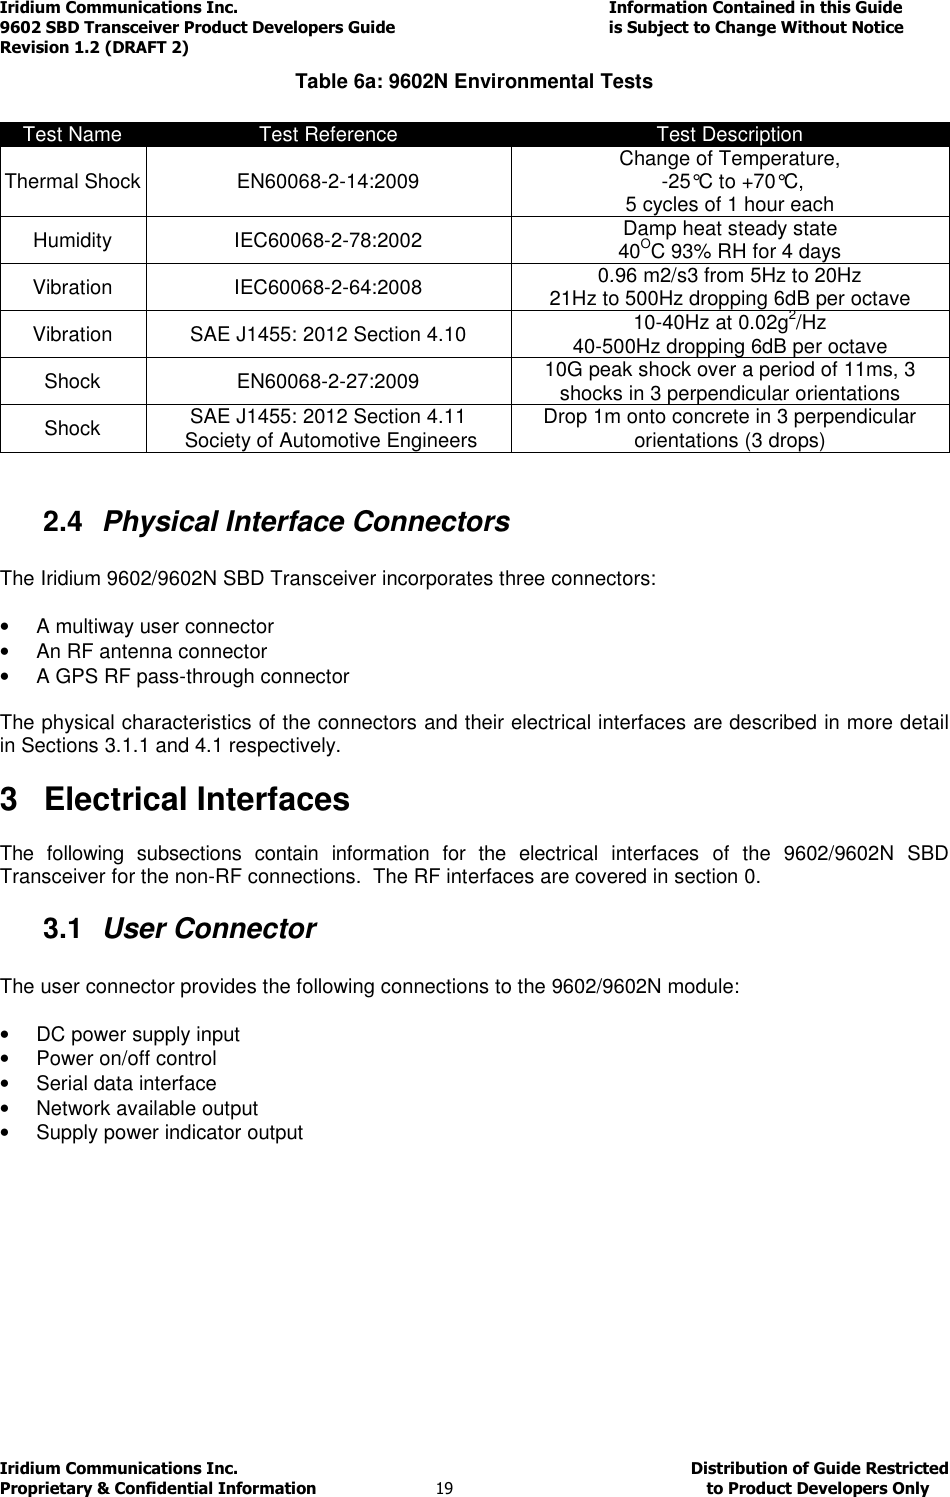 Iridium Communications Inc.                                      Information Contained in this Guide  9602 SBD Transceiver Product Developers Guide                                             is Subject to Change Without Notice  Revision 1.2 (DRAFT 2) Iridium Communications Inc.                                           Distribution of Guide Restricted Proprietary &amp; Confidential Information                         19                                                  to Product Developers Only           Table 6a: 9602N Environmental Tests  Test Name  Test Reference  Test Description Thermal Shock EN60068-2-14:2009  Change of Temperature,  -25°C to +70°C,  5 cycles of 1 hour each Humidity  IEC60068-2-78:2002  Damp heat steady state 40OC 93% RH for 4 days Vibration  IEC60068-2-64:2008  0.96 m2/s3 from 5Hz to 20Hz 21Hz to 500Hz dropping 6dB per octave Vibration  SAE J1455: 2012 Section 4.10  10-40Hz at 0.02g2/Hz  40-500Hz dropping 6dB per octave Shock  EN60068-2-27:2009  10G peak shock over a period of 11ms, 3 shocks in 3 perpendicular orientations Shock  SAE J1455: 2012 Section 4.11   Society of Automotive Engineers  Drop 1m onto concrete in 3 perpendicular orientations (3 drops)  2.4  Physical Interface Connectors  The Iridium 9602/9602N SBD Transceiver incorporates three connectors:   •  A multiway user connector •  An RF antenna connector •  A GPS RF pass-through connector  The physical characteristics of the connectors and their electrical interfaces are described in more detail in Sections 3.1.1 and 4.1 respectively.  3  Electrical Interfaces  The  following  subsections  contain  information  for  the  electrical  interfaces  of  the  9602/9602N  SBD Transceiver for the non-RF connections.  The RF interfaces are covered in section 0. 3.1  User Connector  The user connector provides the following connections to the 9602/9602N module:  •  DC power supply input •  Power on/off control •  Serial data interface  •  Network available output  •  Supply power indicator output        